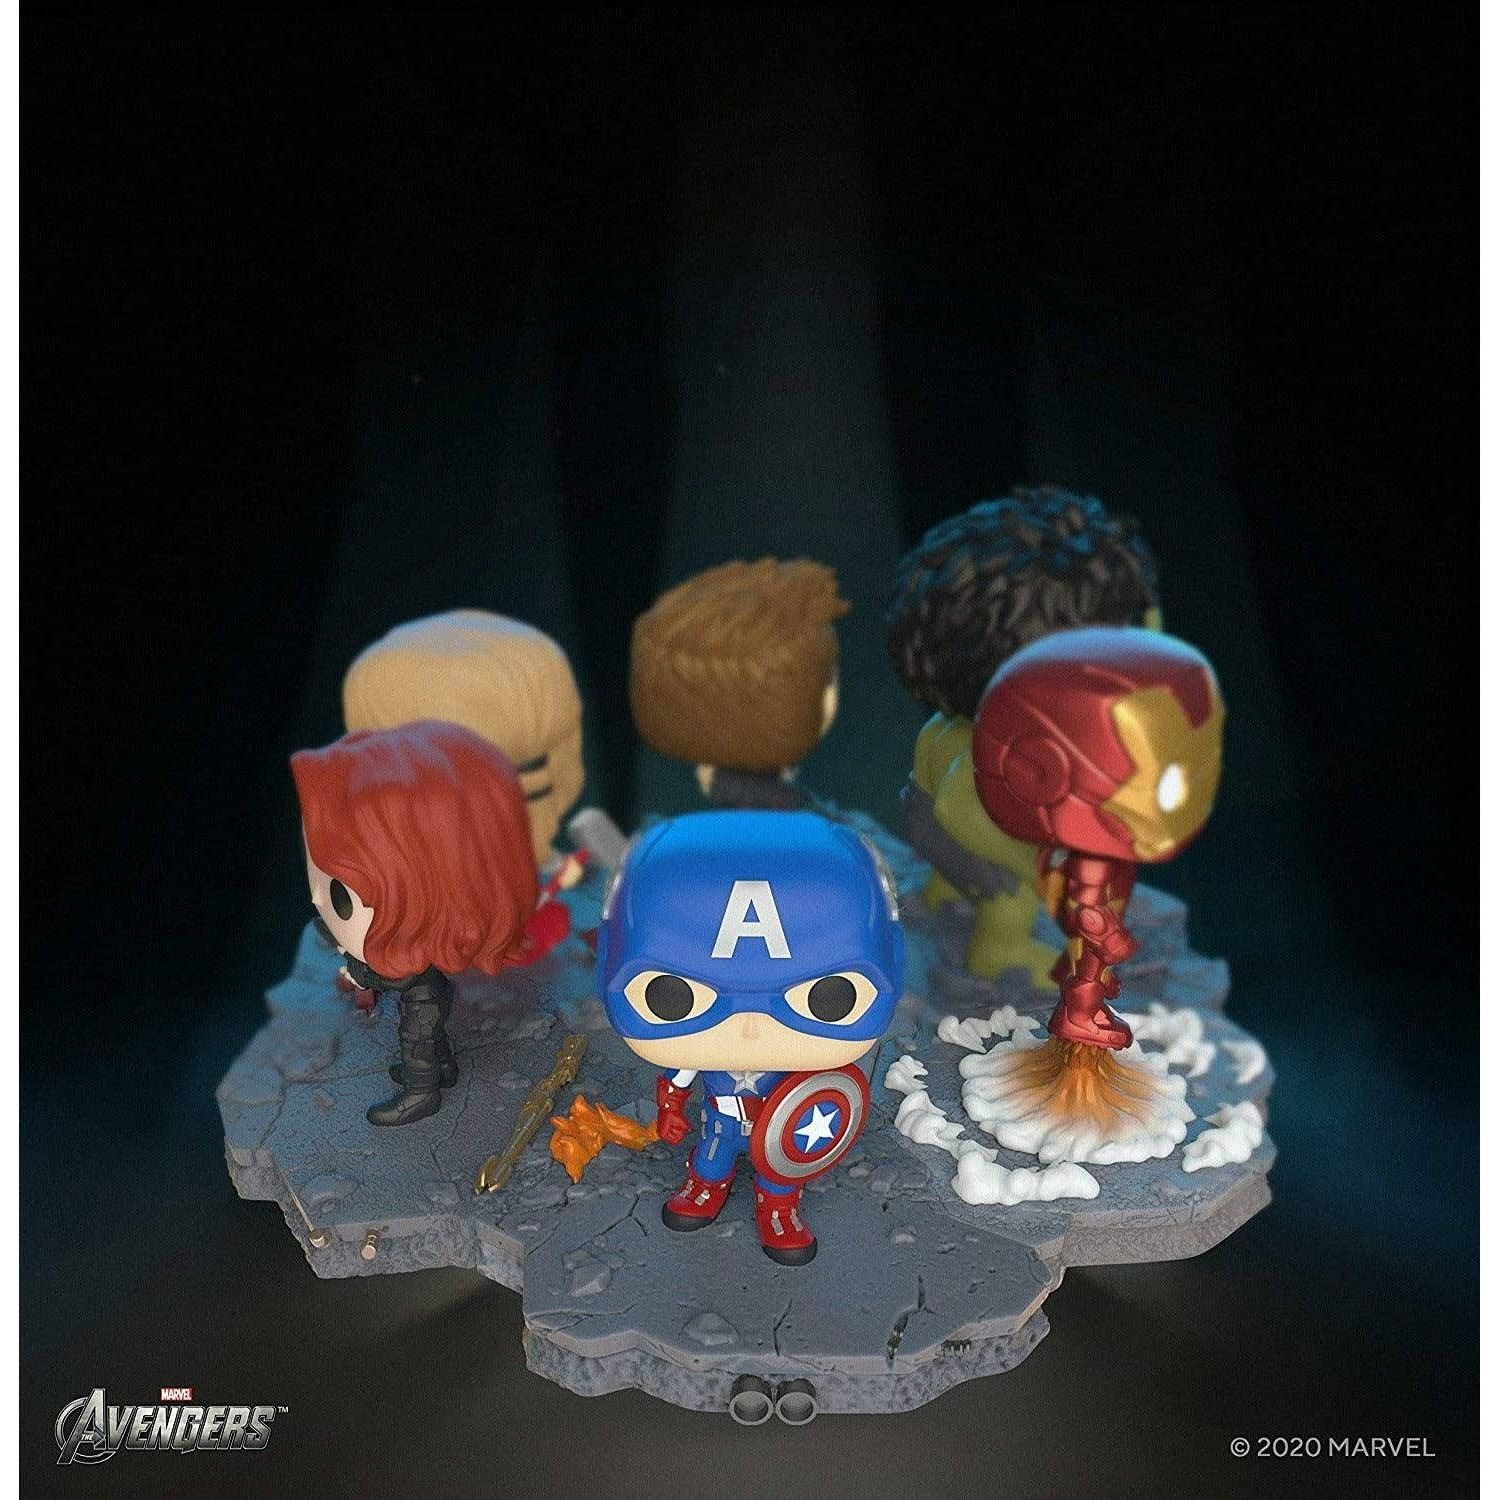 Funko Pop! Deluxe, Marvel: Avengers Assemble Series - Captain America - BumbleToys - 18+, 4+ Years, 5-7 Years, Action Figures, Avengers, Boys, Captain America, Characters, Funko, Pre-Order